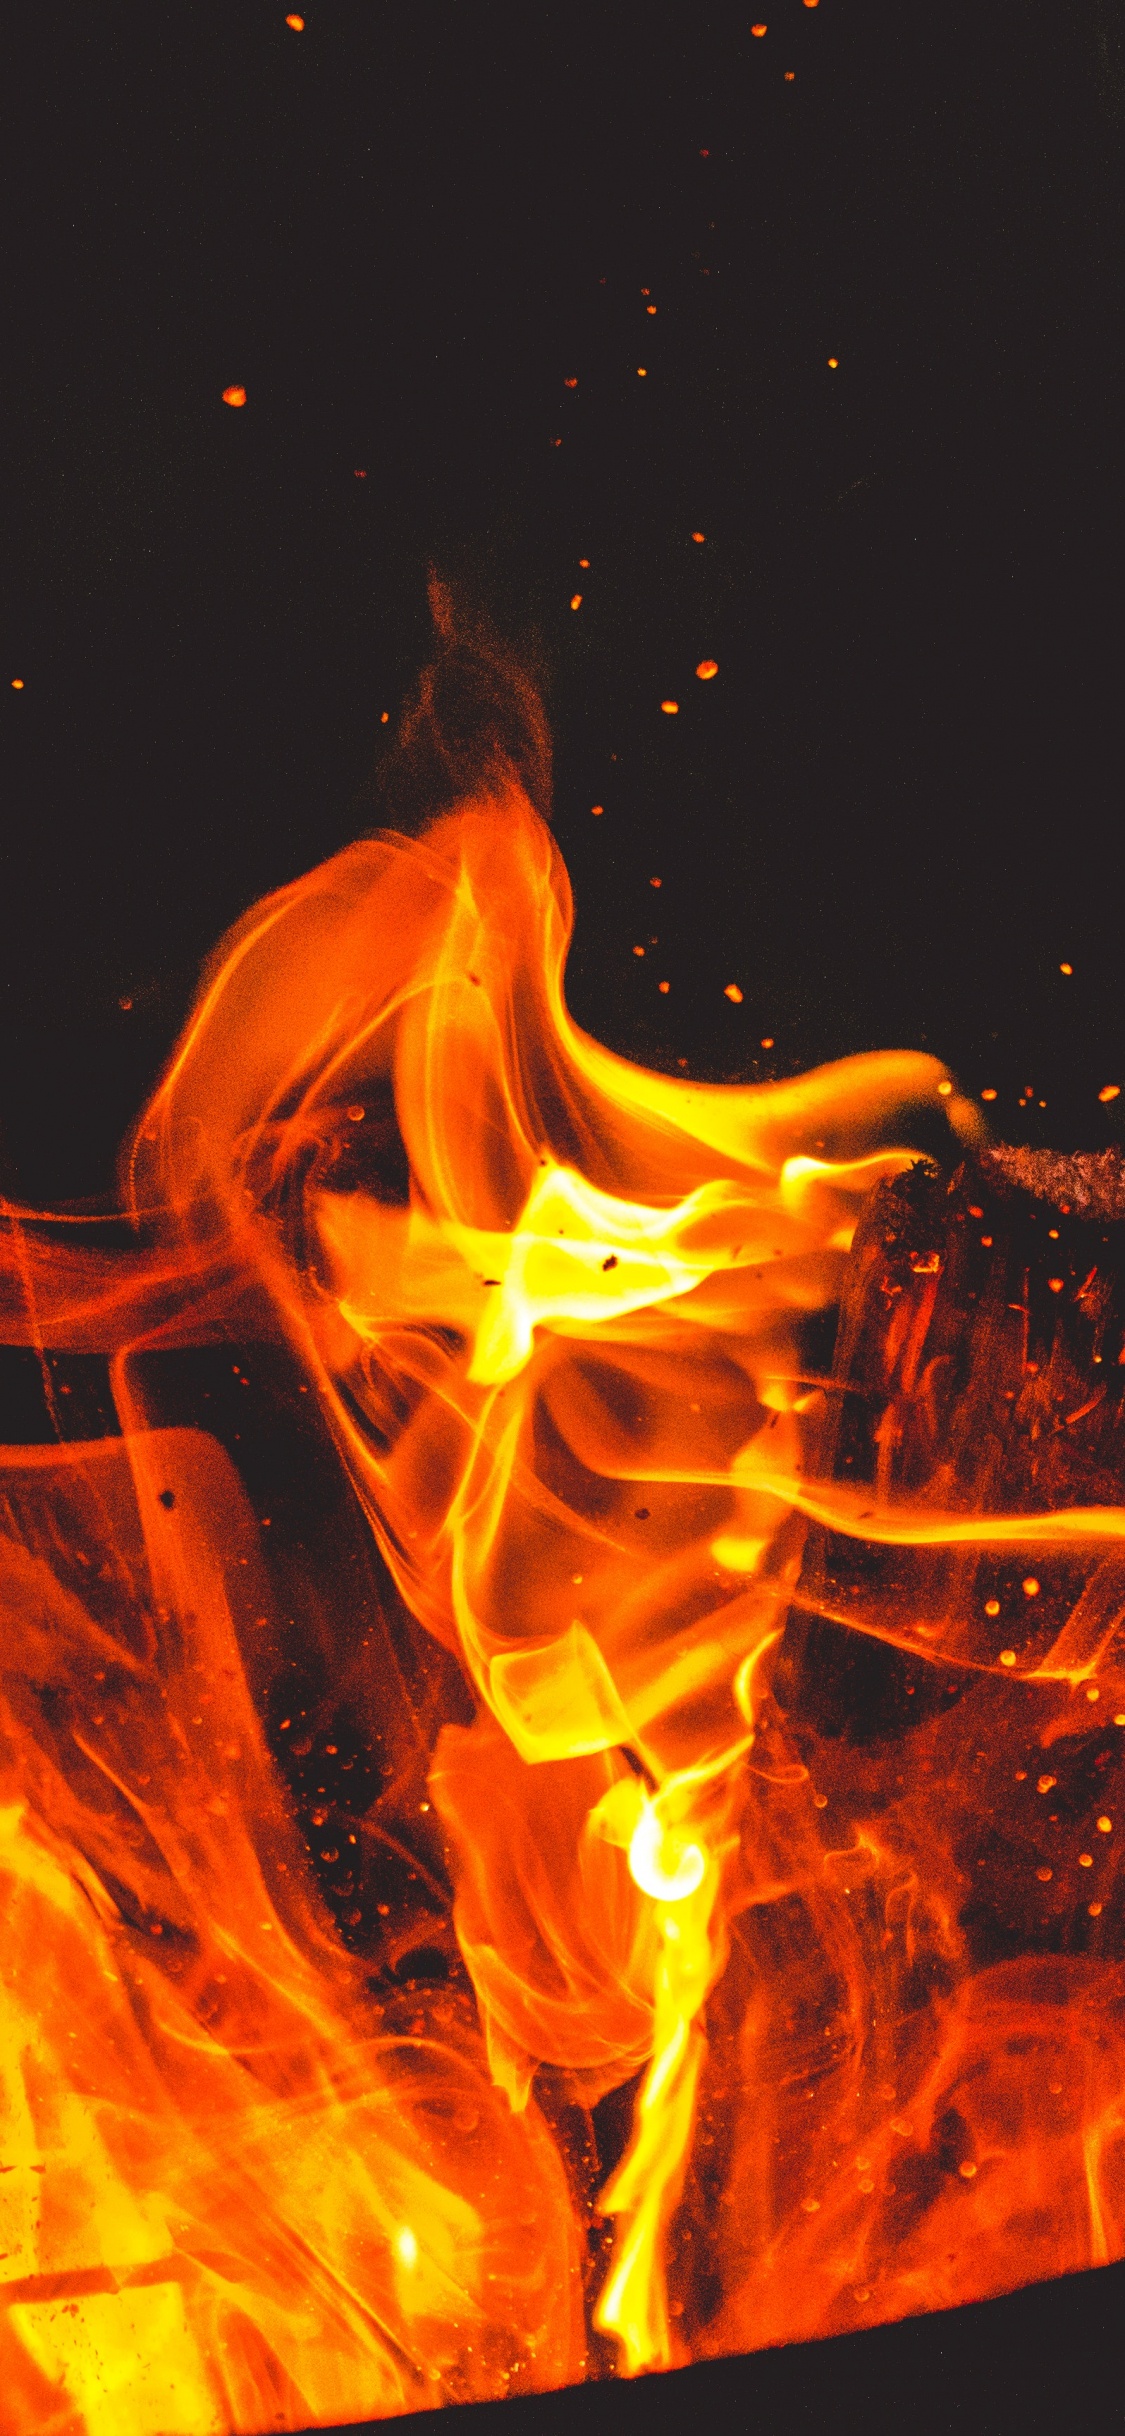 Orange and Yellow Flame Illustration. Wallpaper in 1125x2436 Resolution